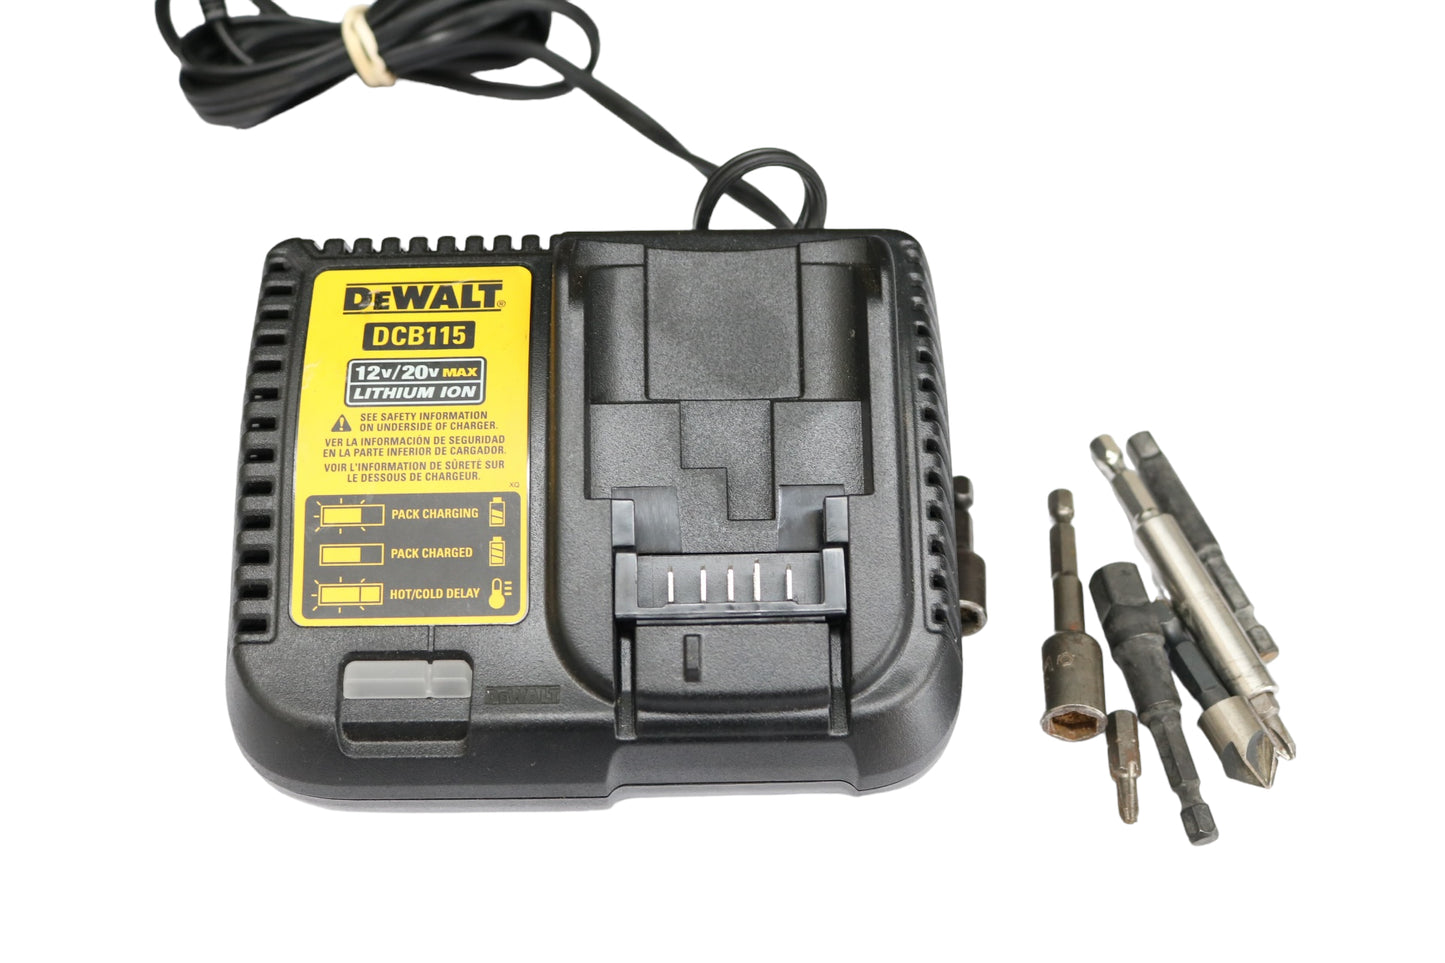 Dewalt Impact Driver DCF887 with charger and 20V 4AH battery (Local pick-up only)